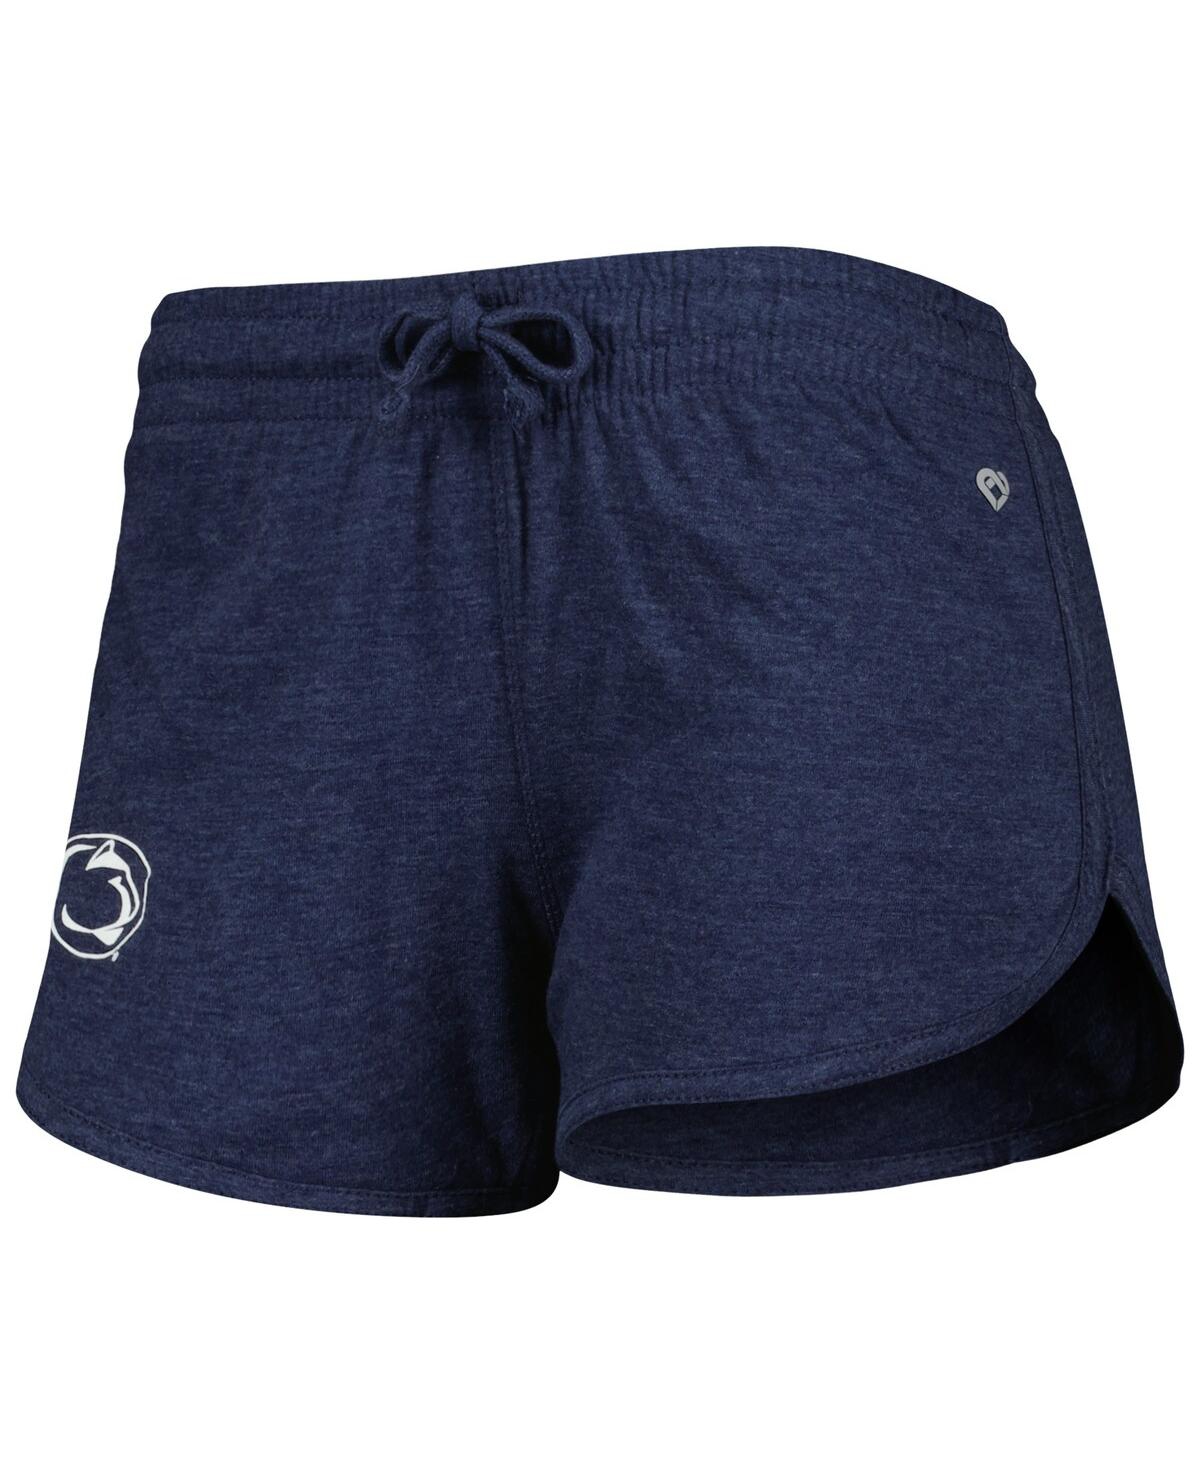 Shop Colosseum Women's  Heather Navy Penn State Nittany Lions Simone Core Shorts